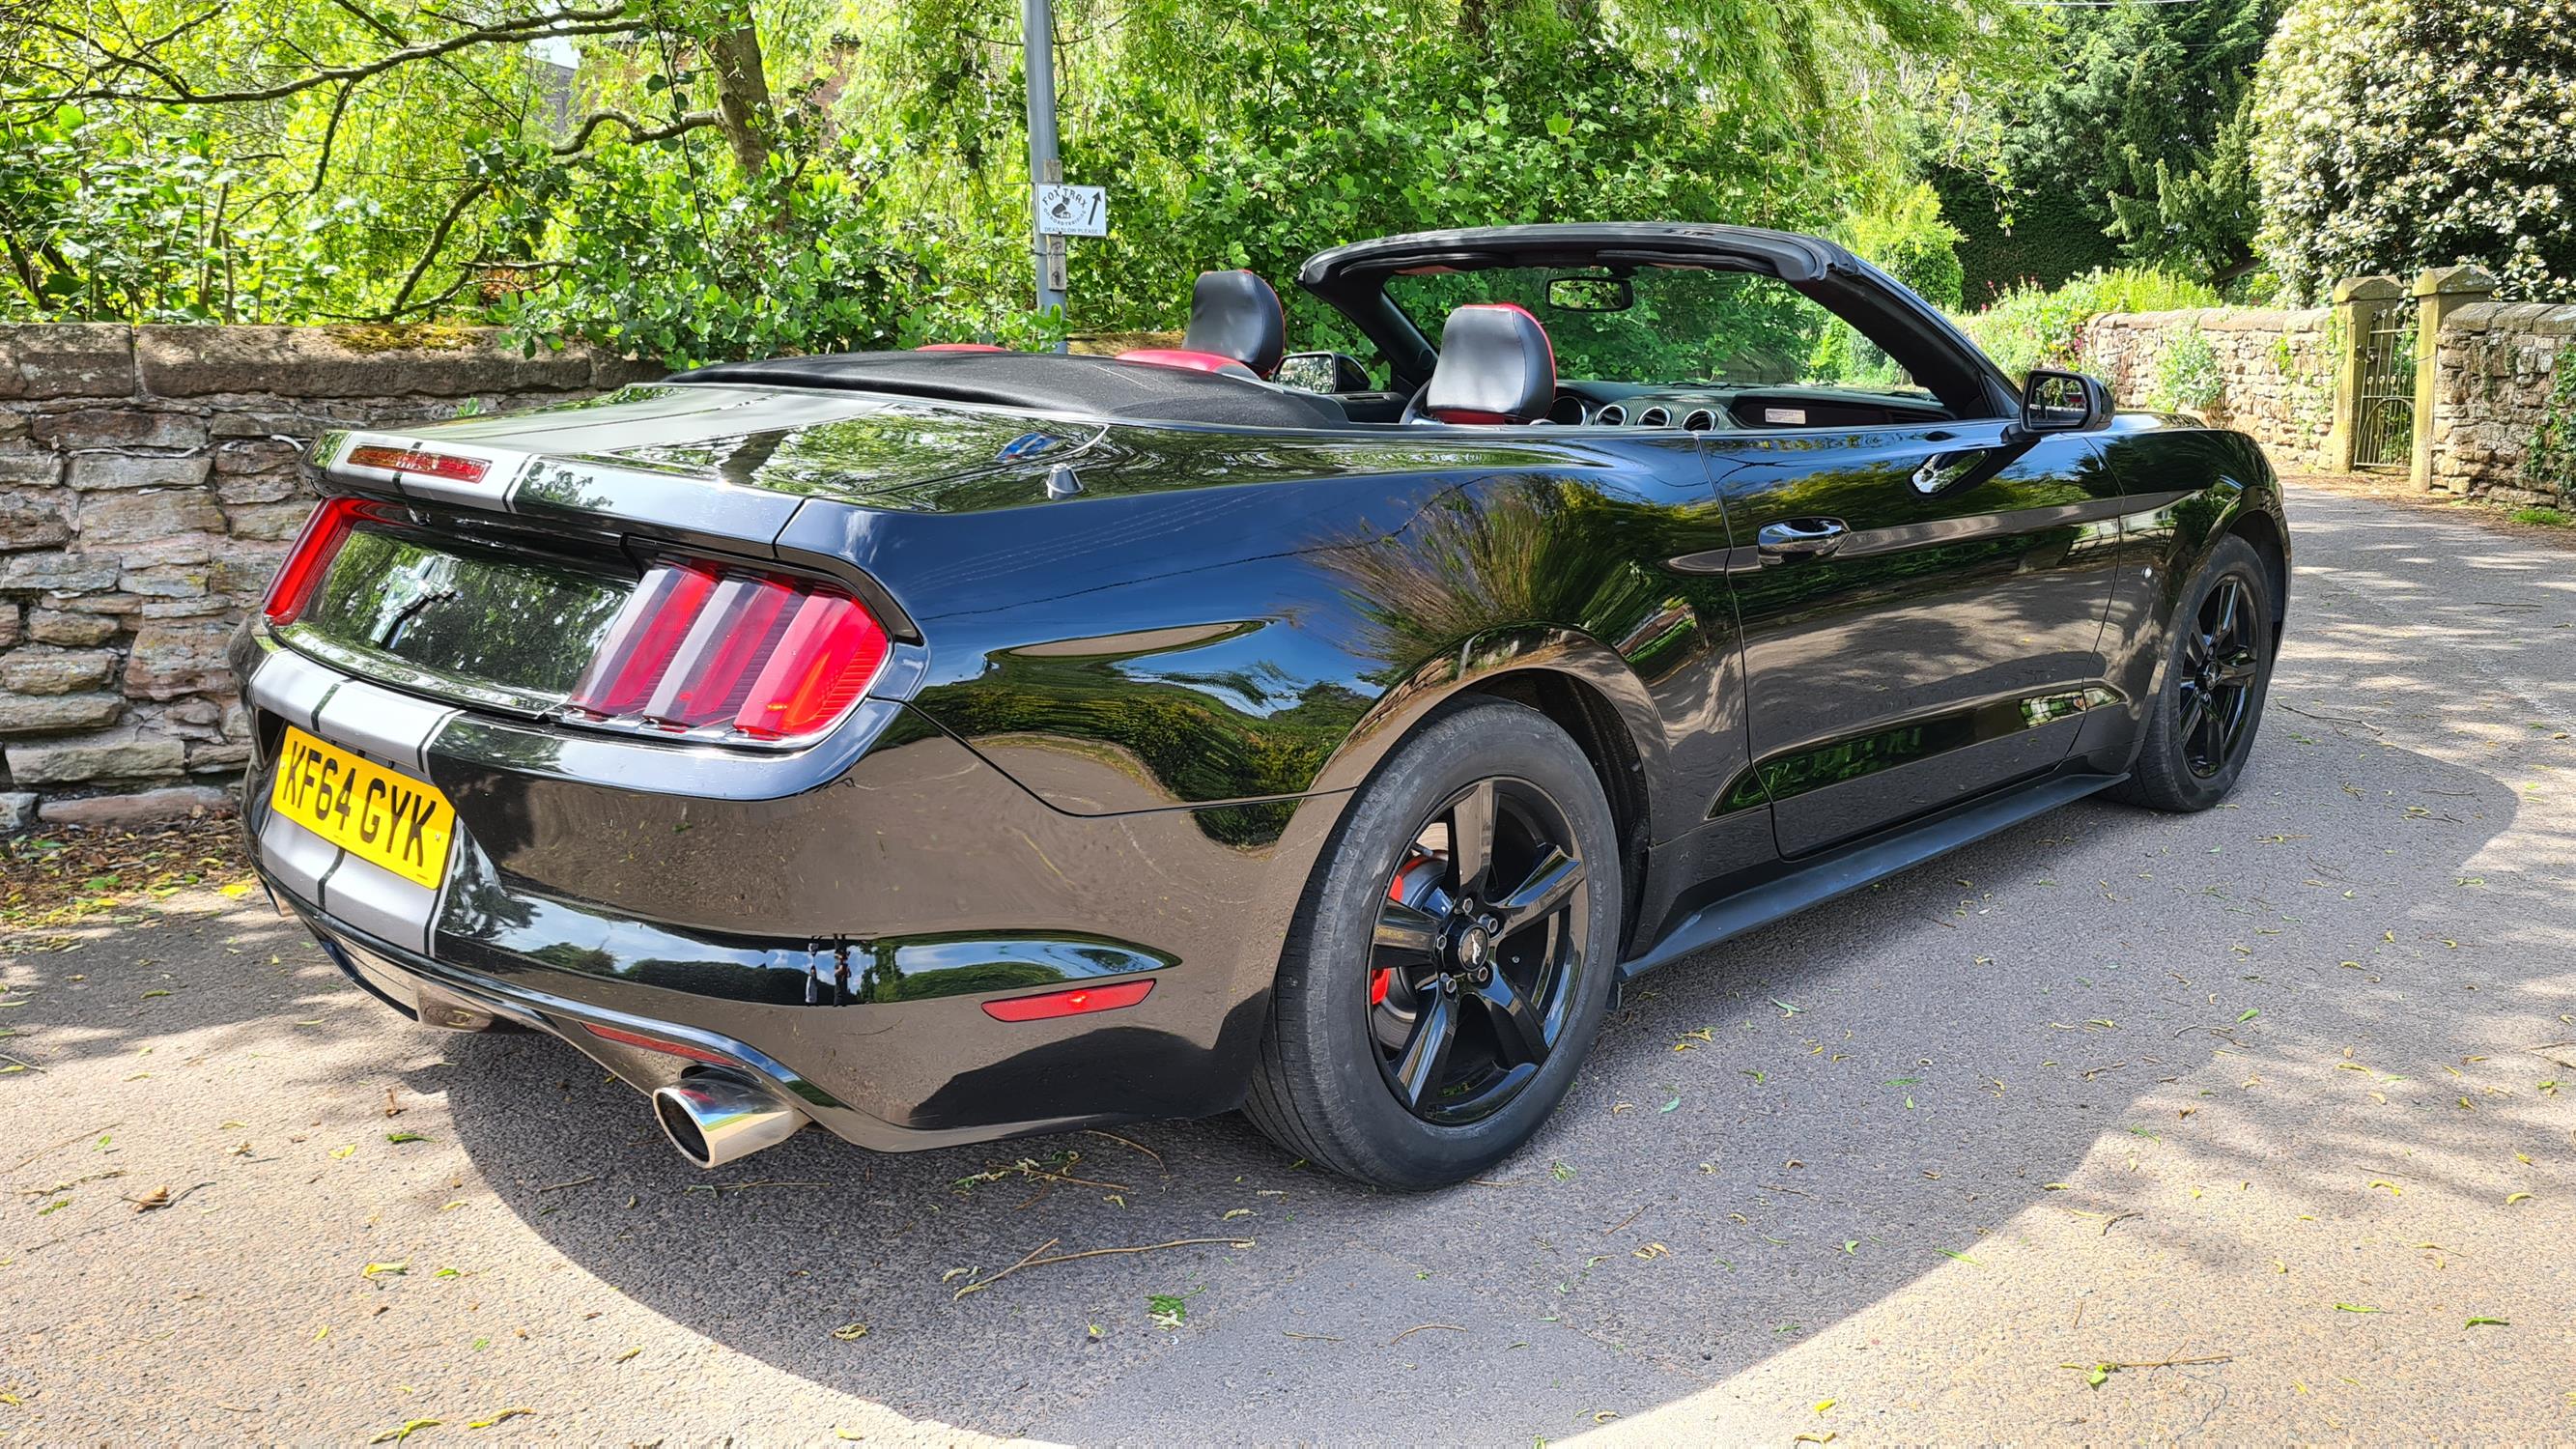 2015 Ford Mustang Convertible (S550) - Image 4 of 10